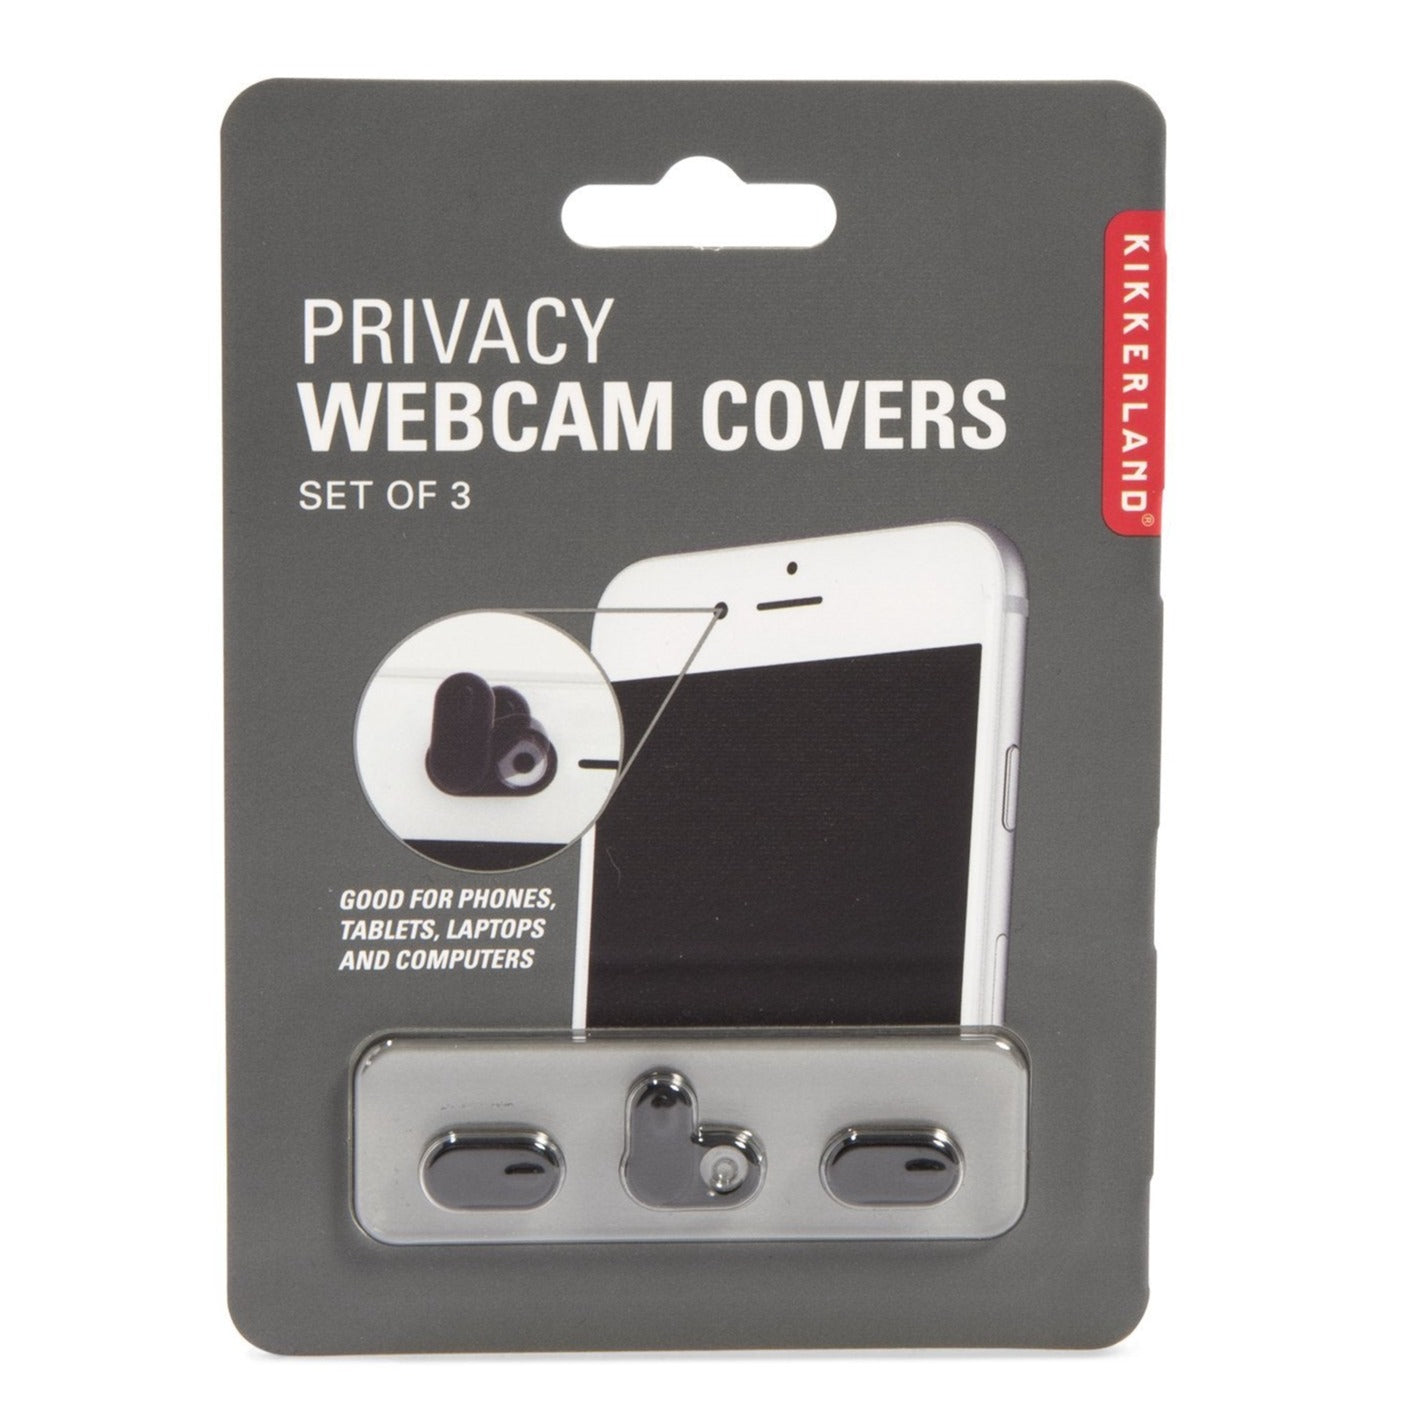 Fabulous Gifts | Kikkerland - Privacy Webcam Covers by Weirs of Baggot Street